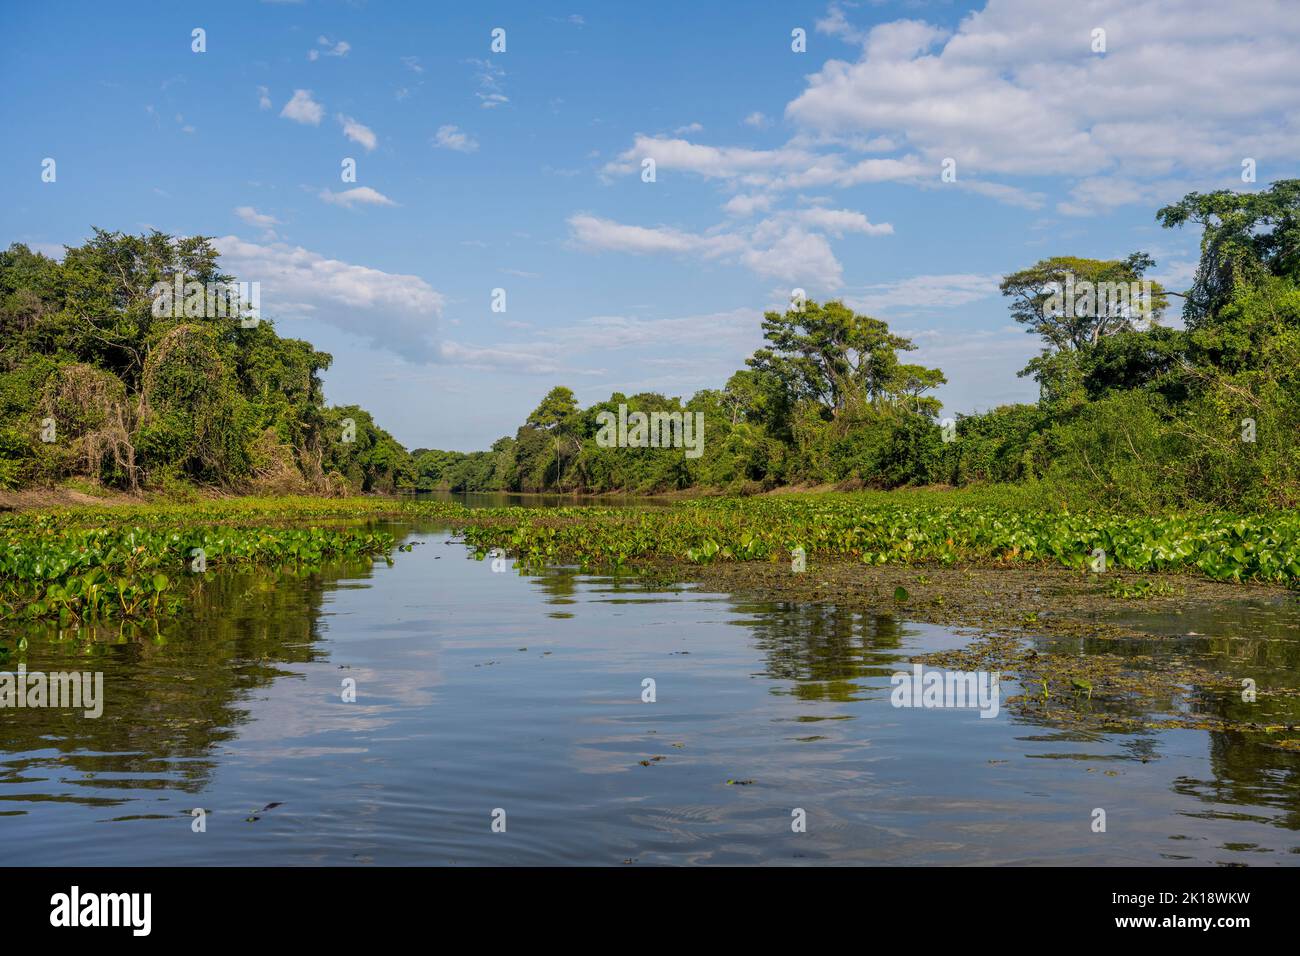 A small tributary river of the Cuiaba River near Porto Jofre in the northern Pantanal, Mato Grosso province in Brazil. Stock Photo